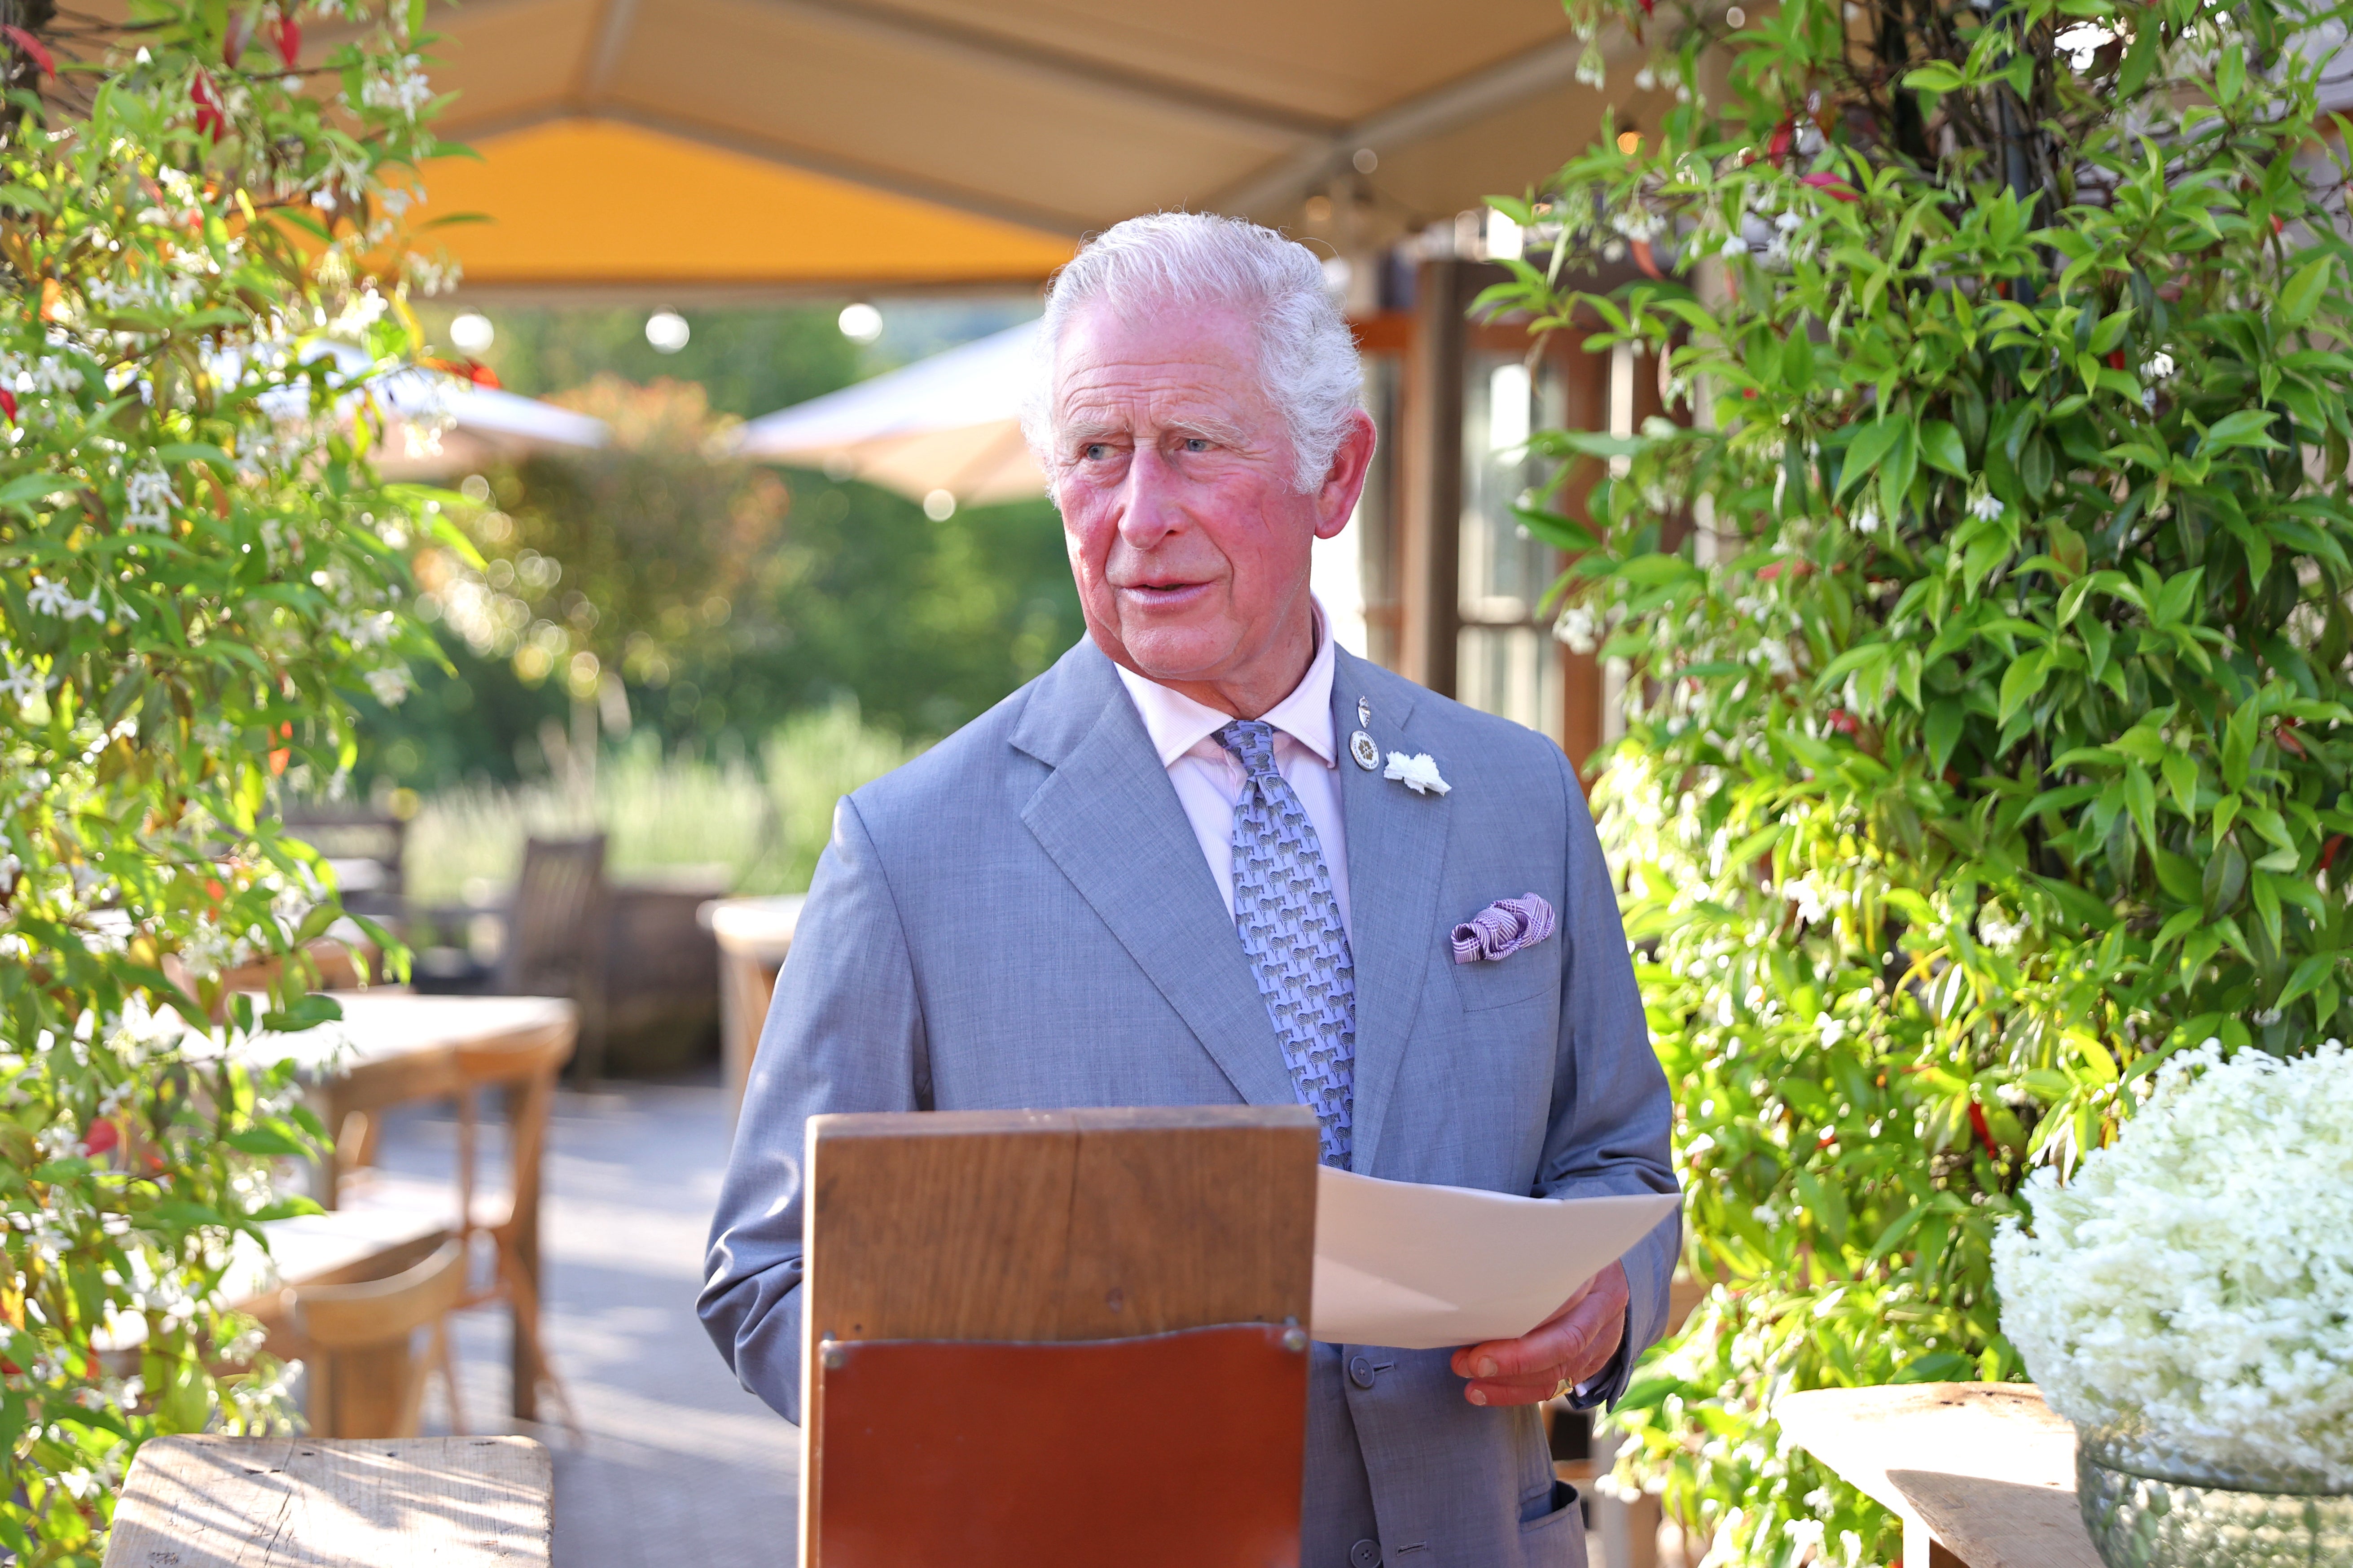 The Prince of Wales at the Duchy of Cornwall Nursery in Lostwithiel, Cornwall (Chris Jackson/PA)